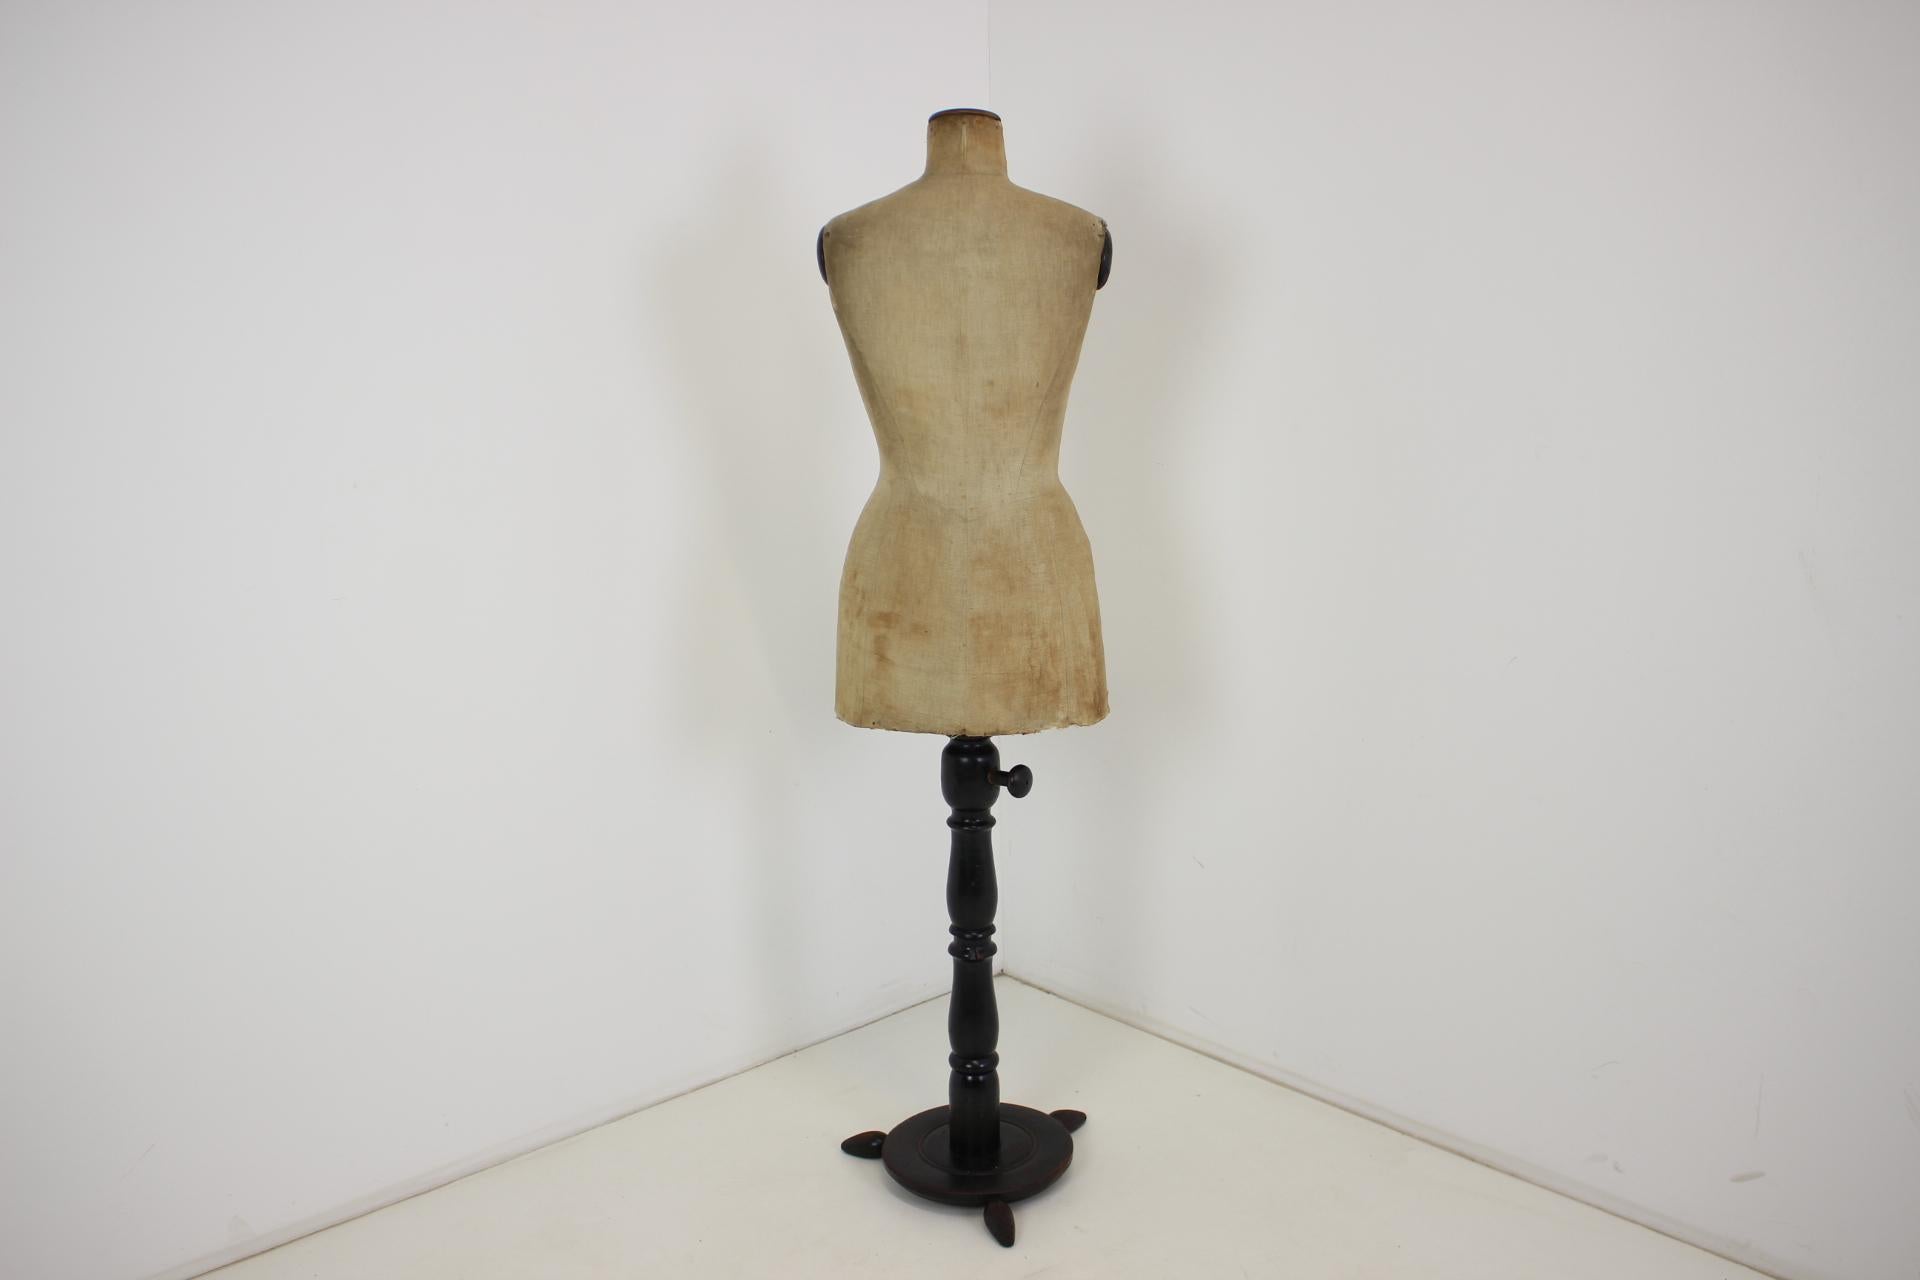 -Height adjustable tailor's maiden, 1920s
- Made of wood, fabric and hard paper
-The lower part of the virgin shows signs of slight damage
-The height of the full extension is 183cm.